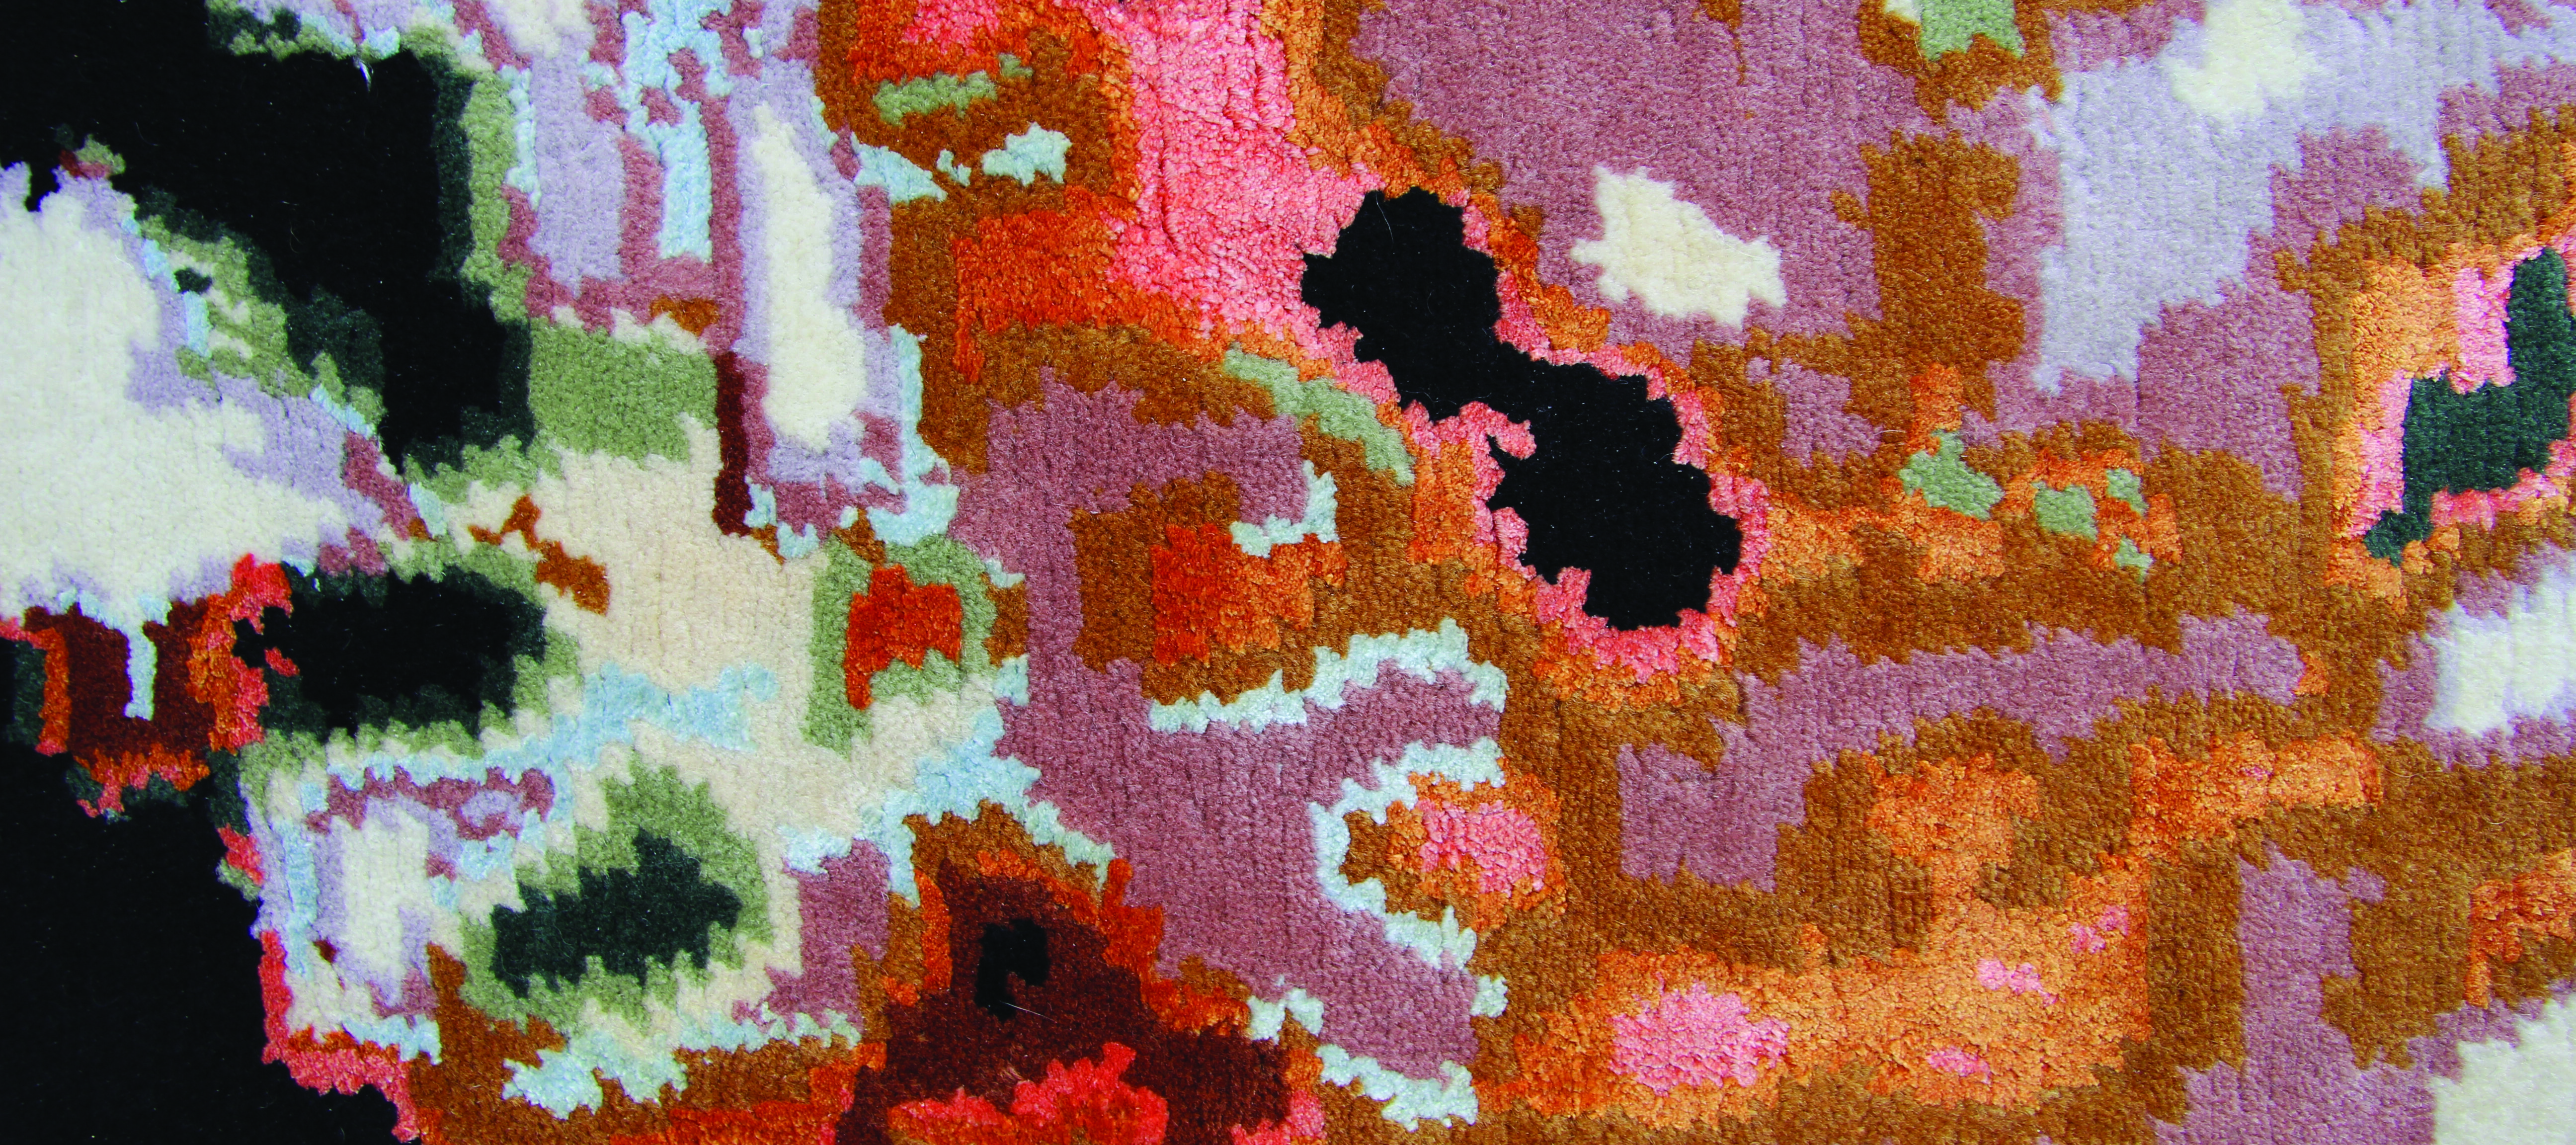 An up-close image of a plush tapestry woven with wool and silk. The colorful, abstract pattern on the tapestry looks like a pixelated image. Its organic shapes resemble a satellite image of the weather, but the pattern is woven in peaches, oranges, blacks, and very light blues.